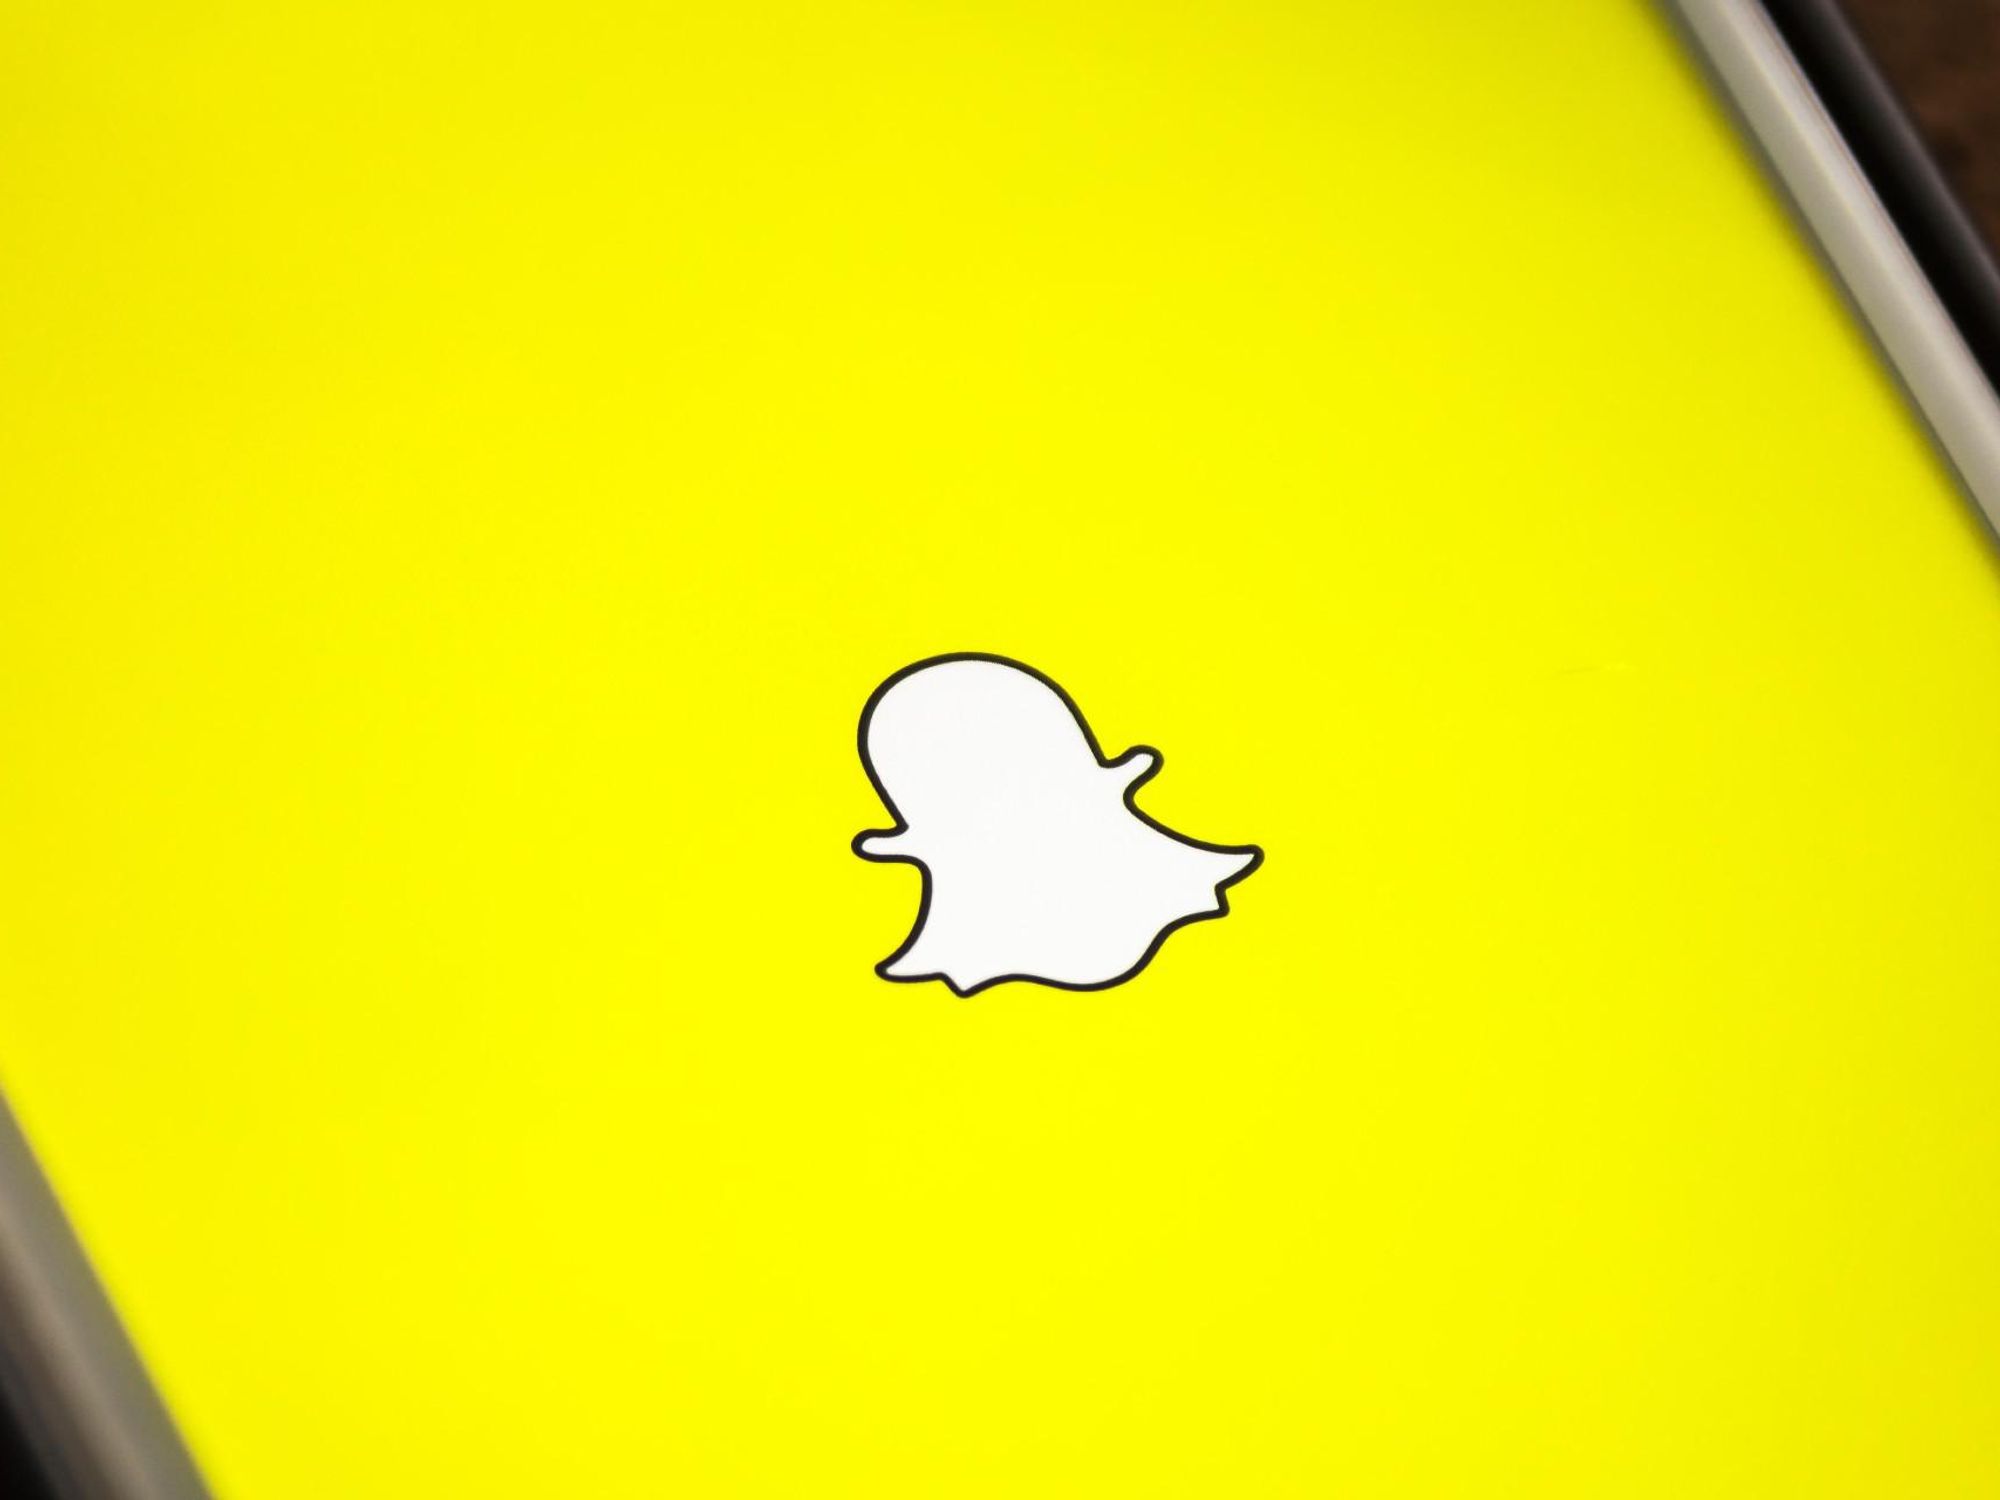 Snap Beats Wall Street's Q1 Expectations, Aims to Expand AR Use Globally